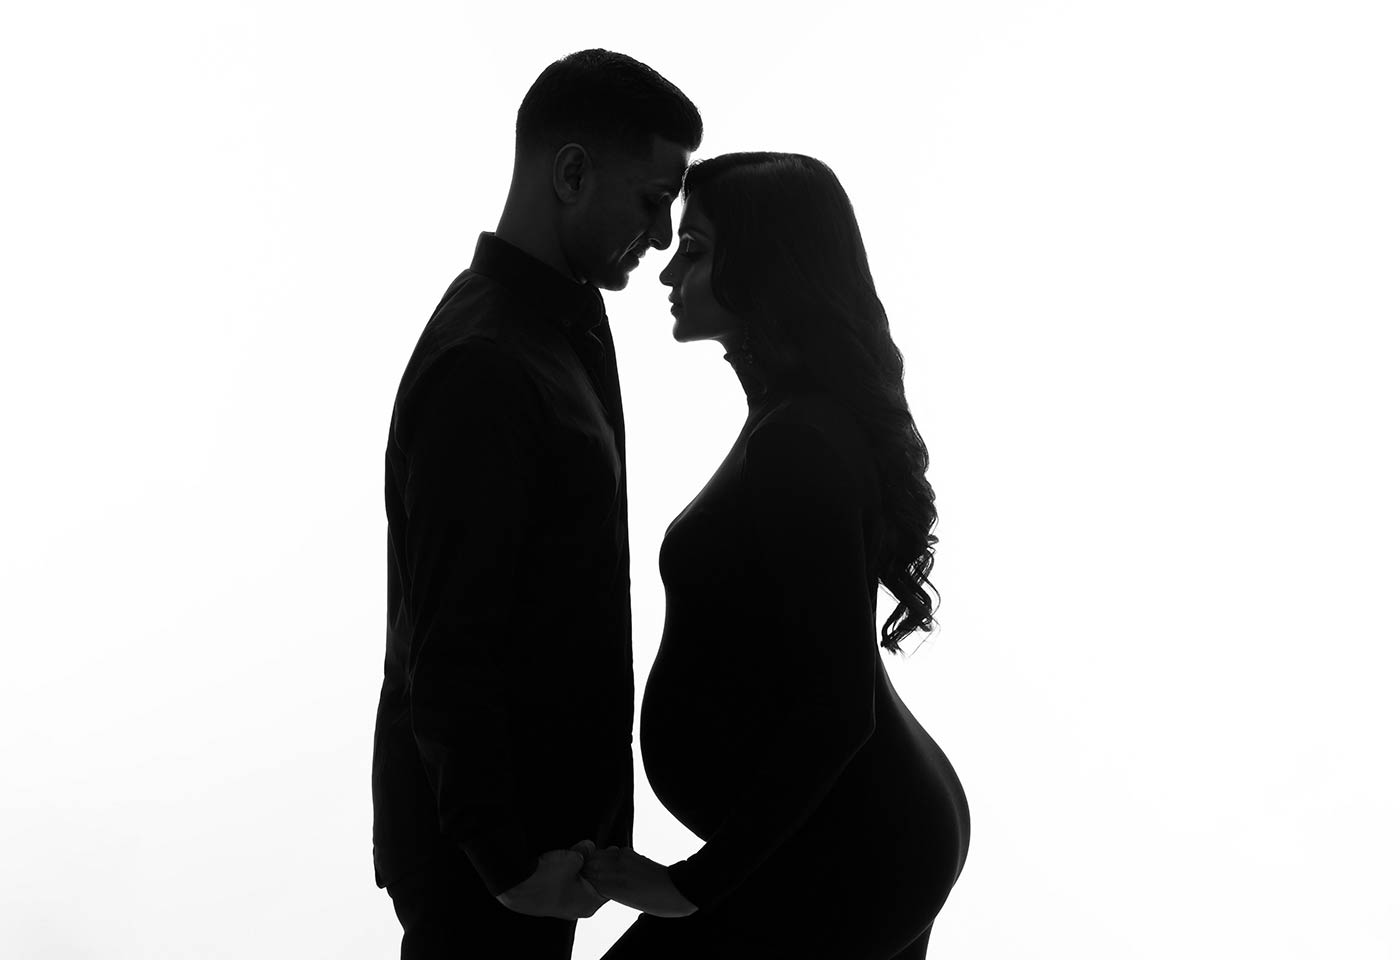 Black and white silhouette of a married couple during pregnancy